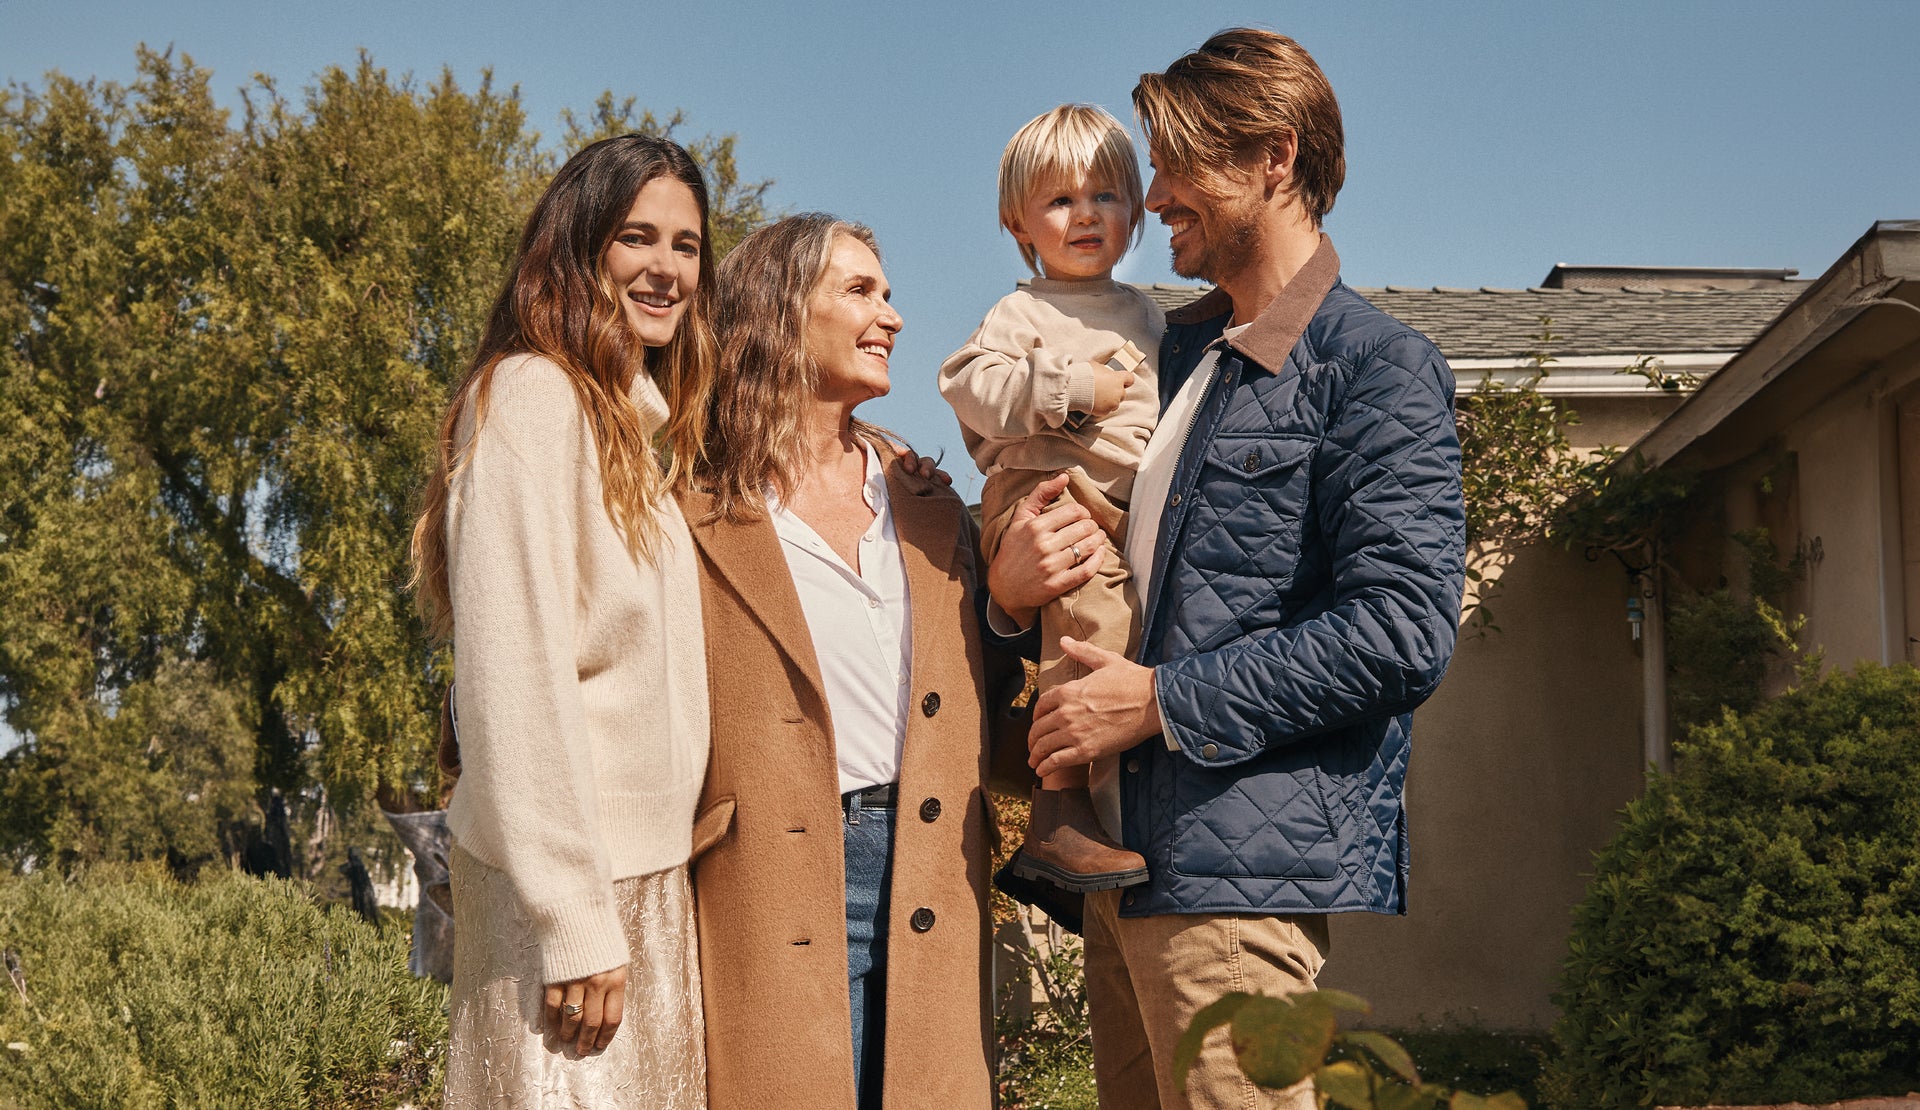 EDITORIAL IMAGE OF FAMILY OUTSIDE DRESSED FOR THE HOLIDAYS